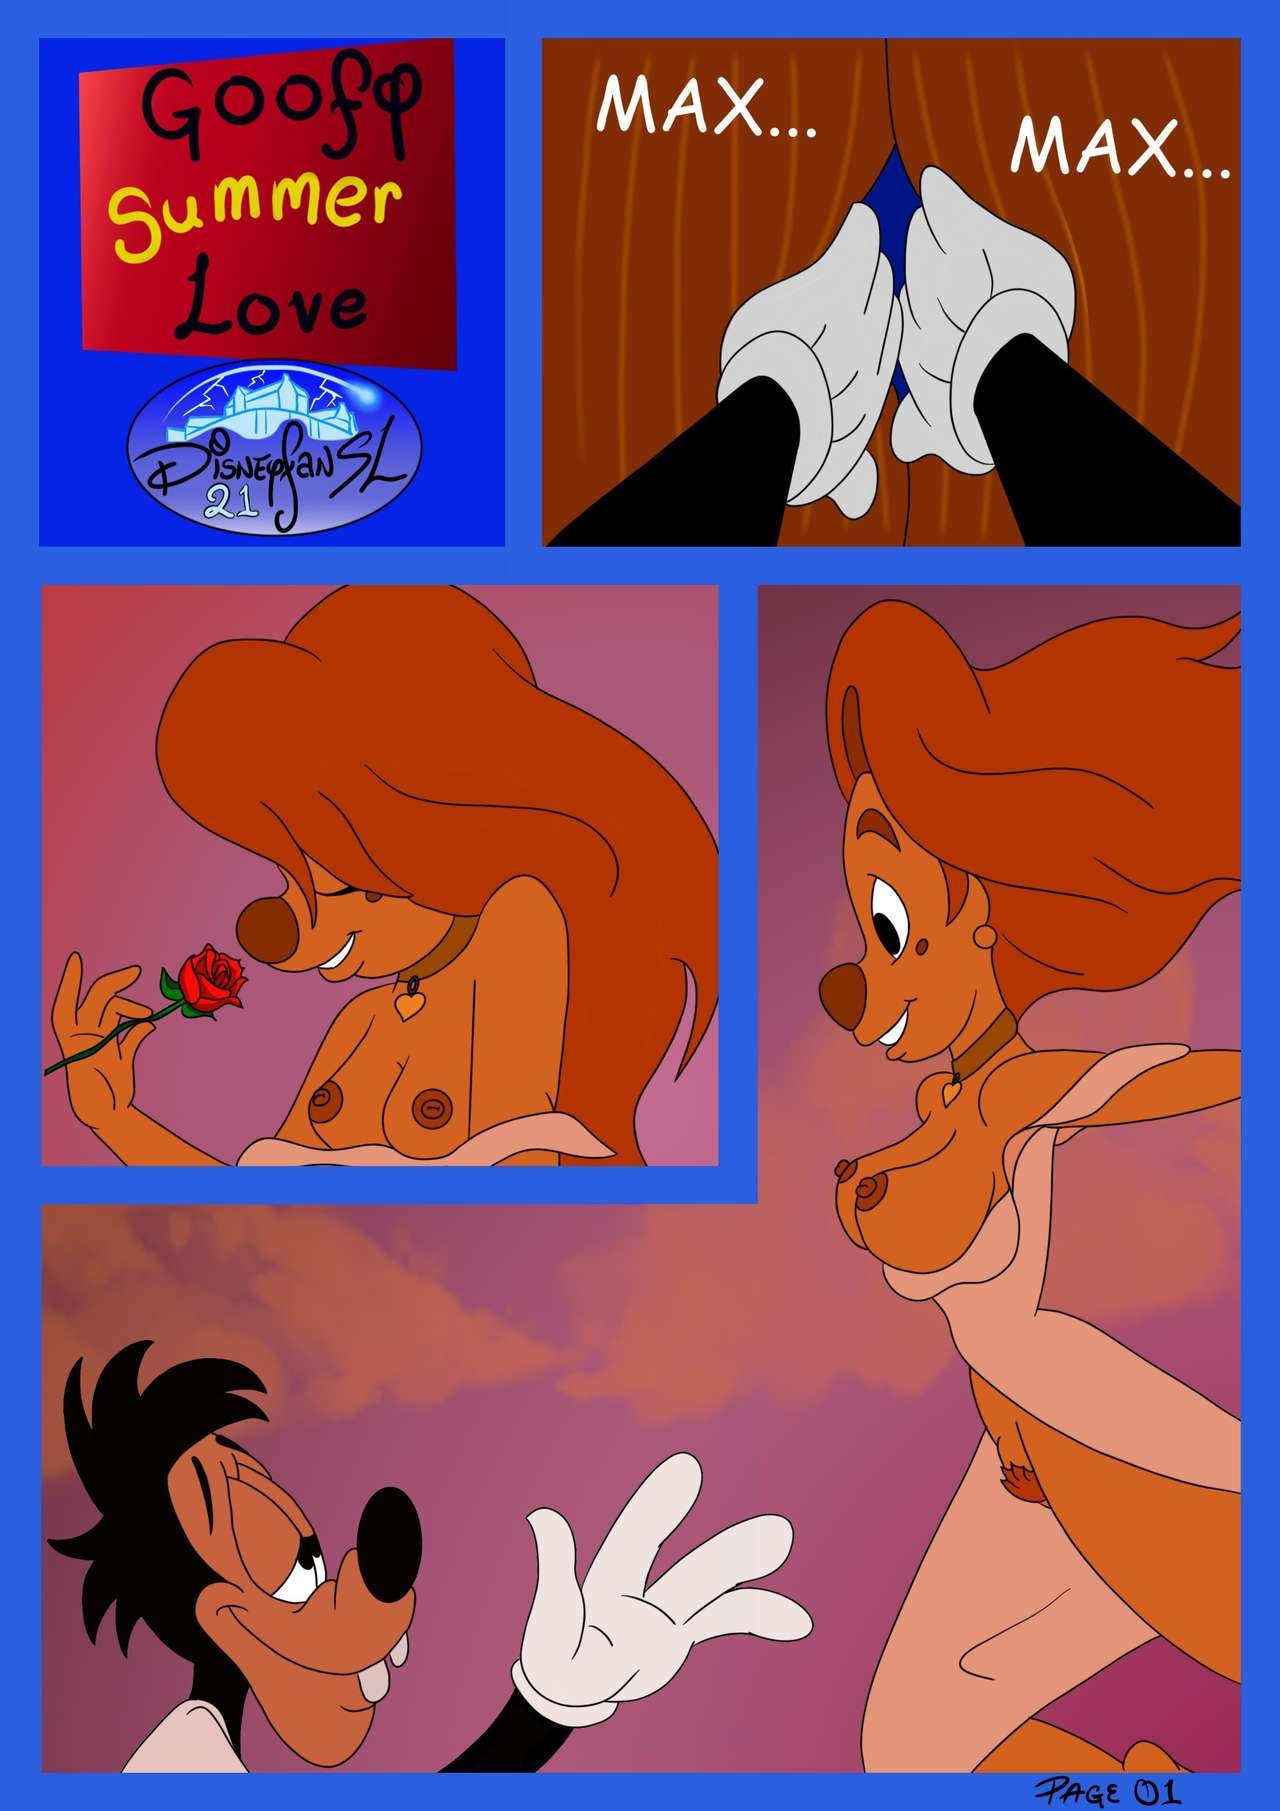 brenda weekes recommends A Goofy Movie Sex